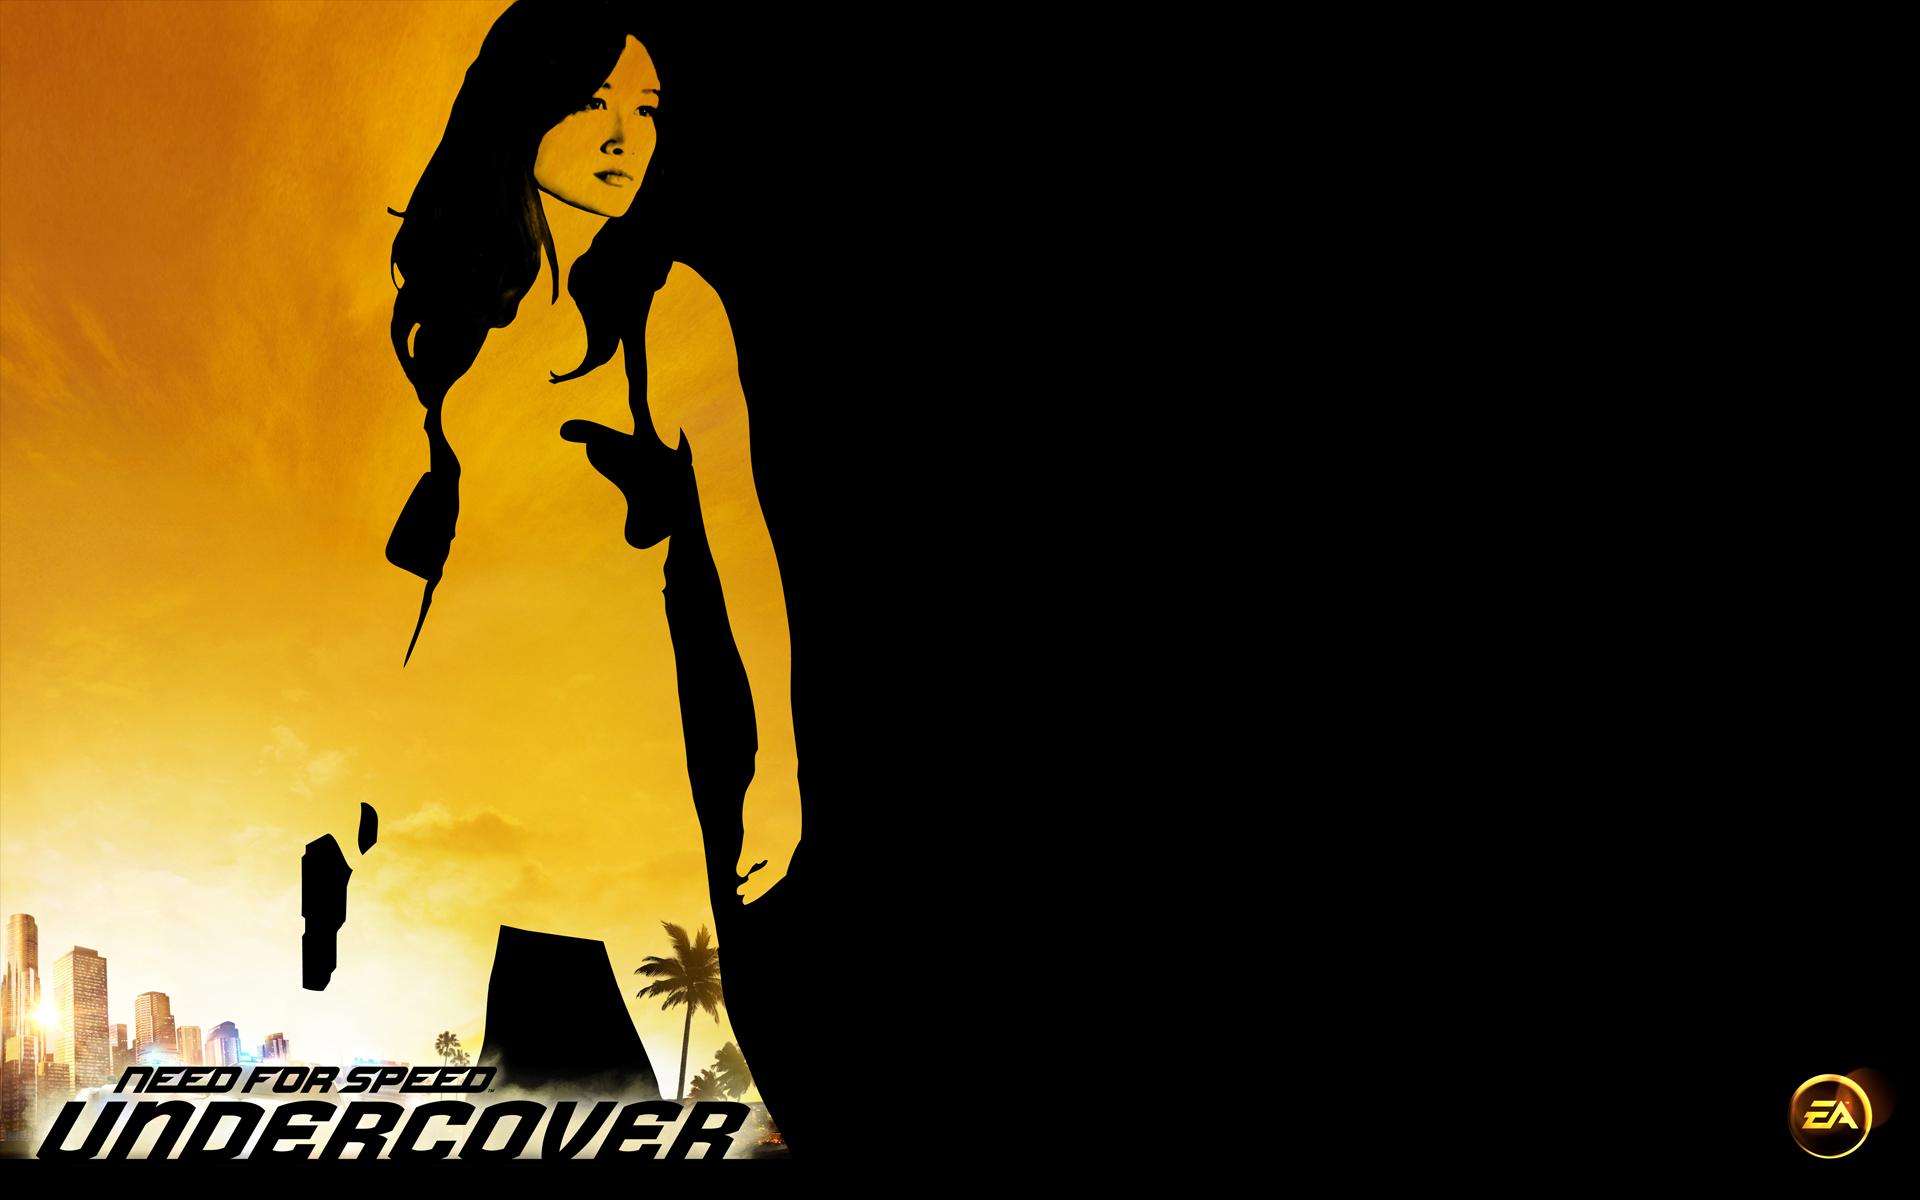 NFS girl silhouette wallpapers NFS girl silhouette stock photos